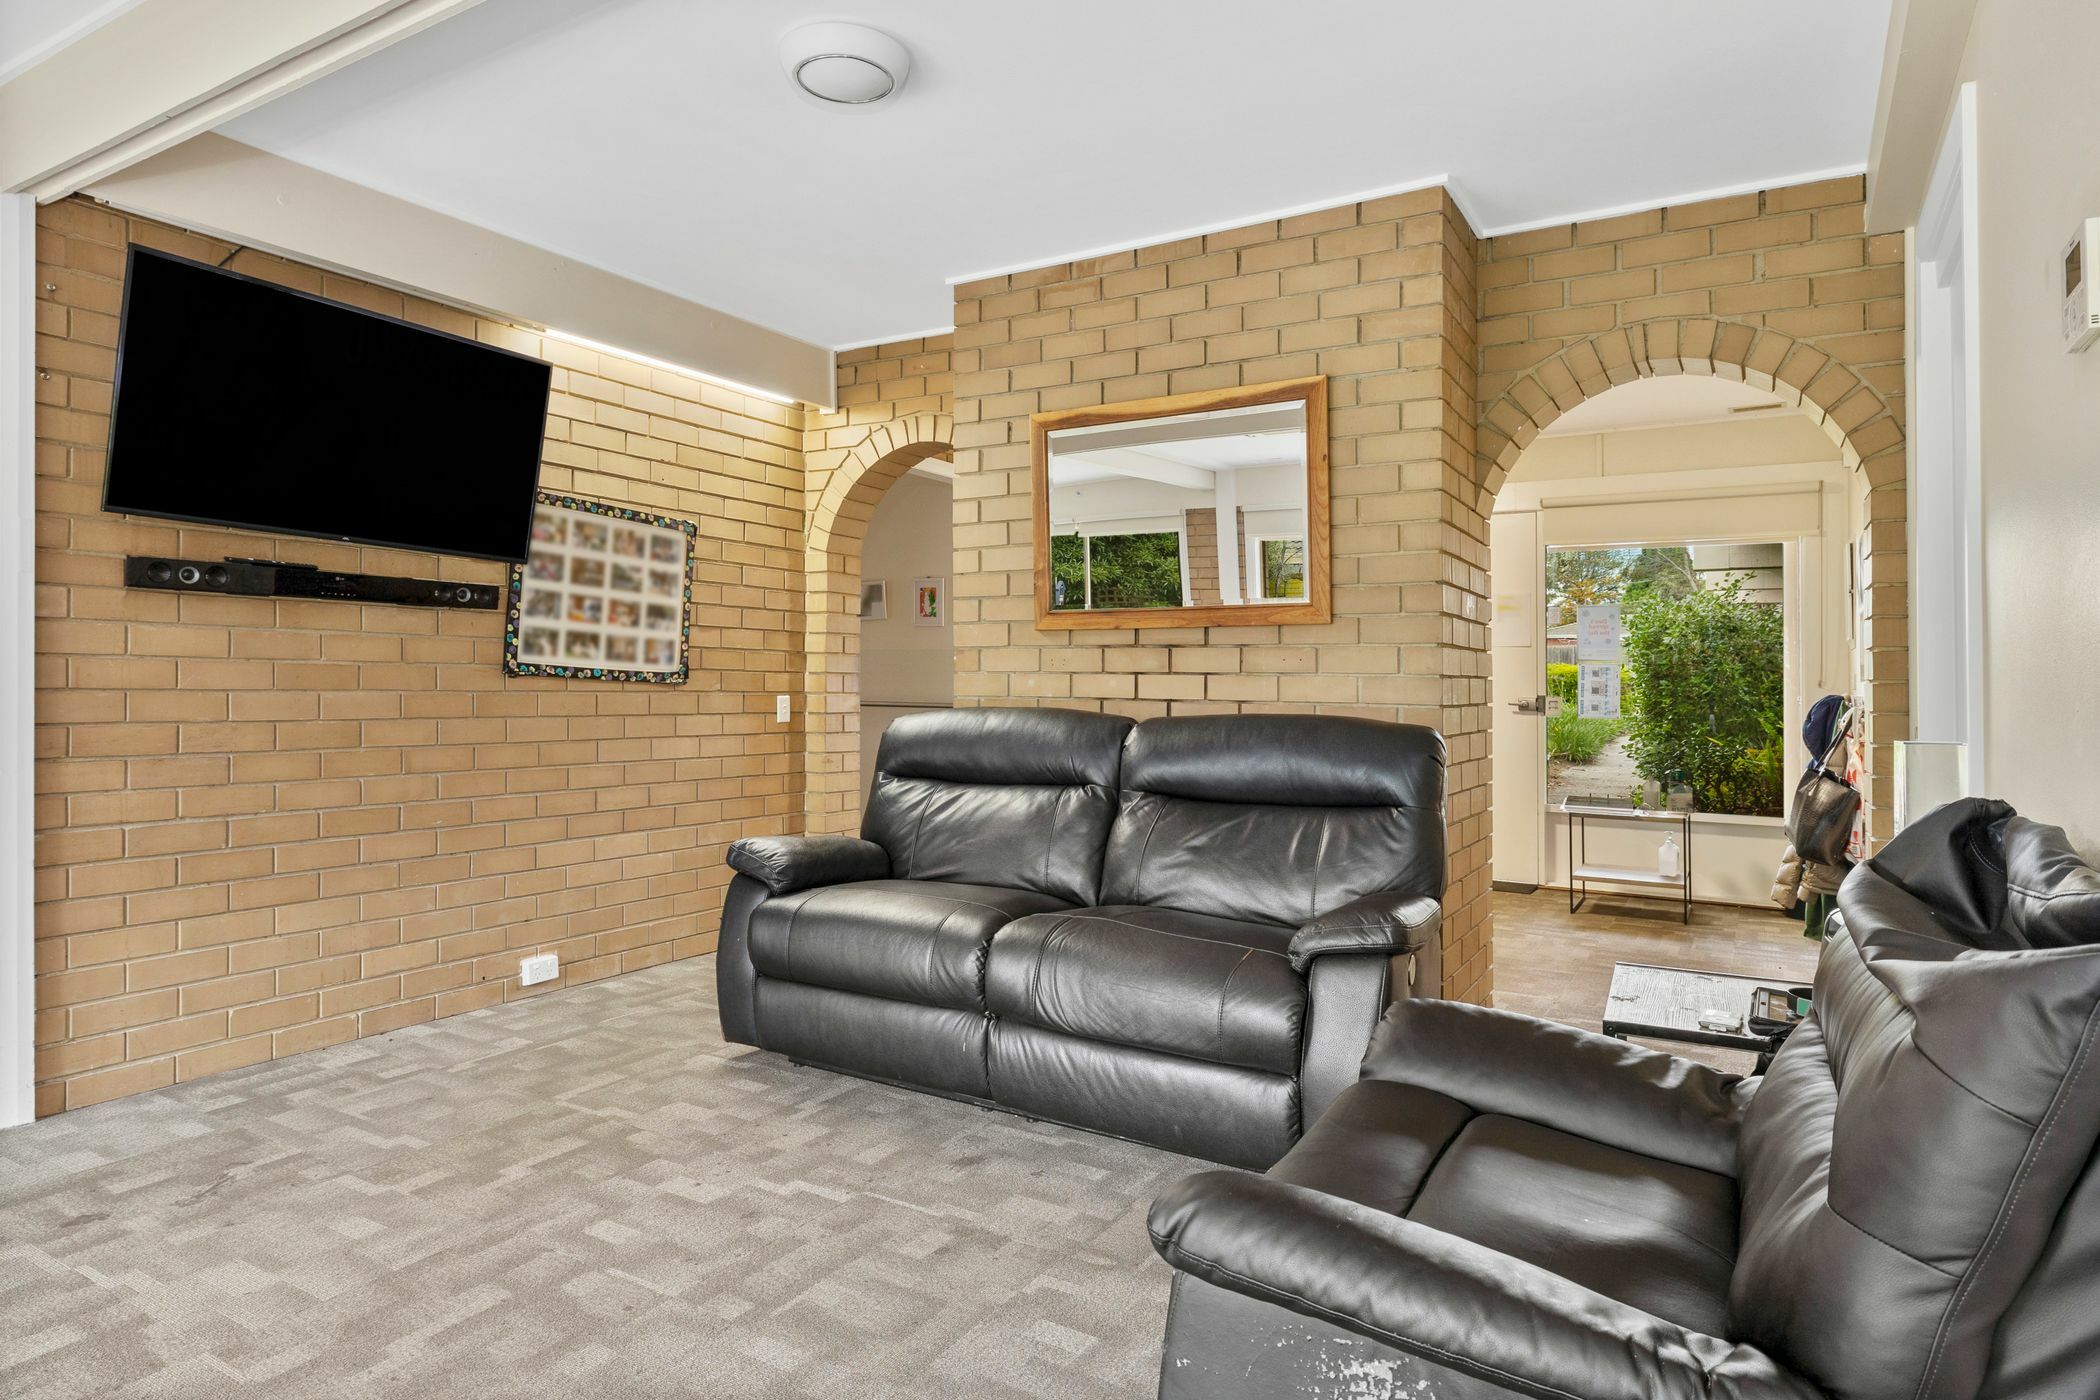 Living room area with black leather recliners